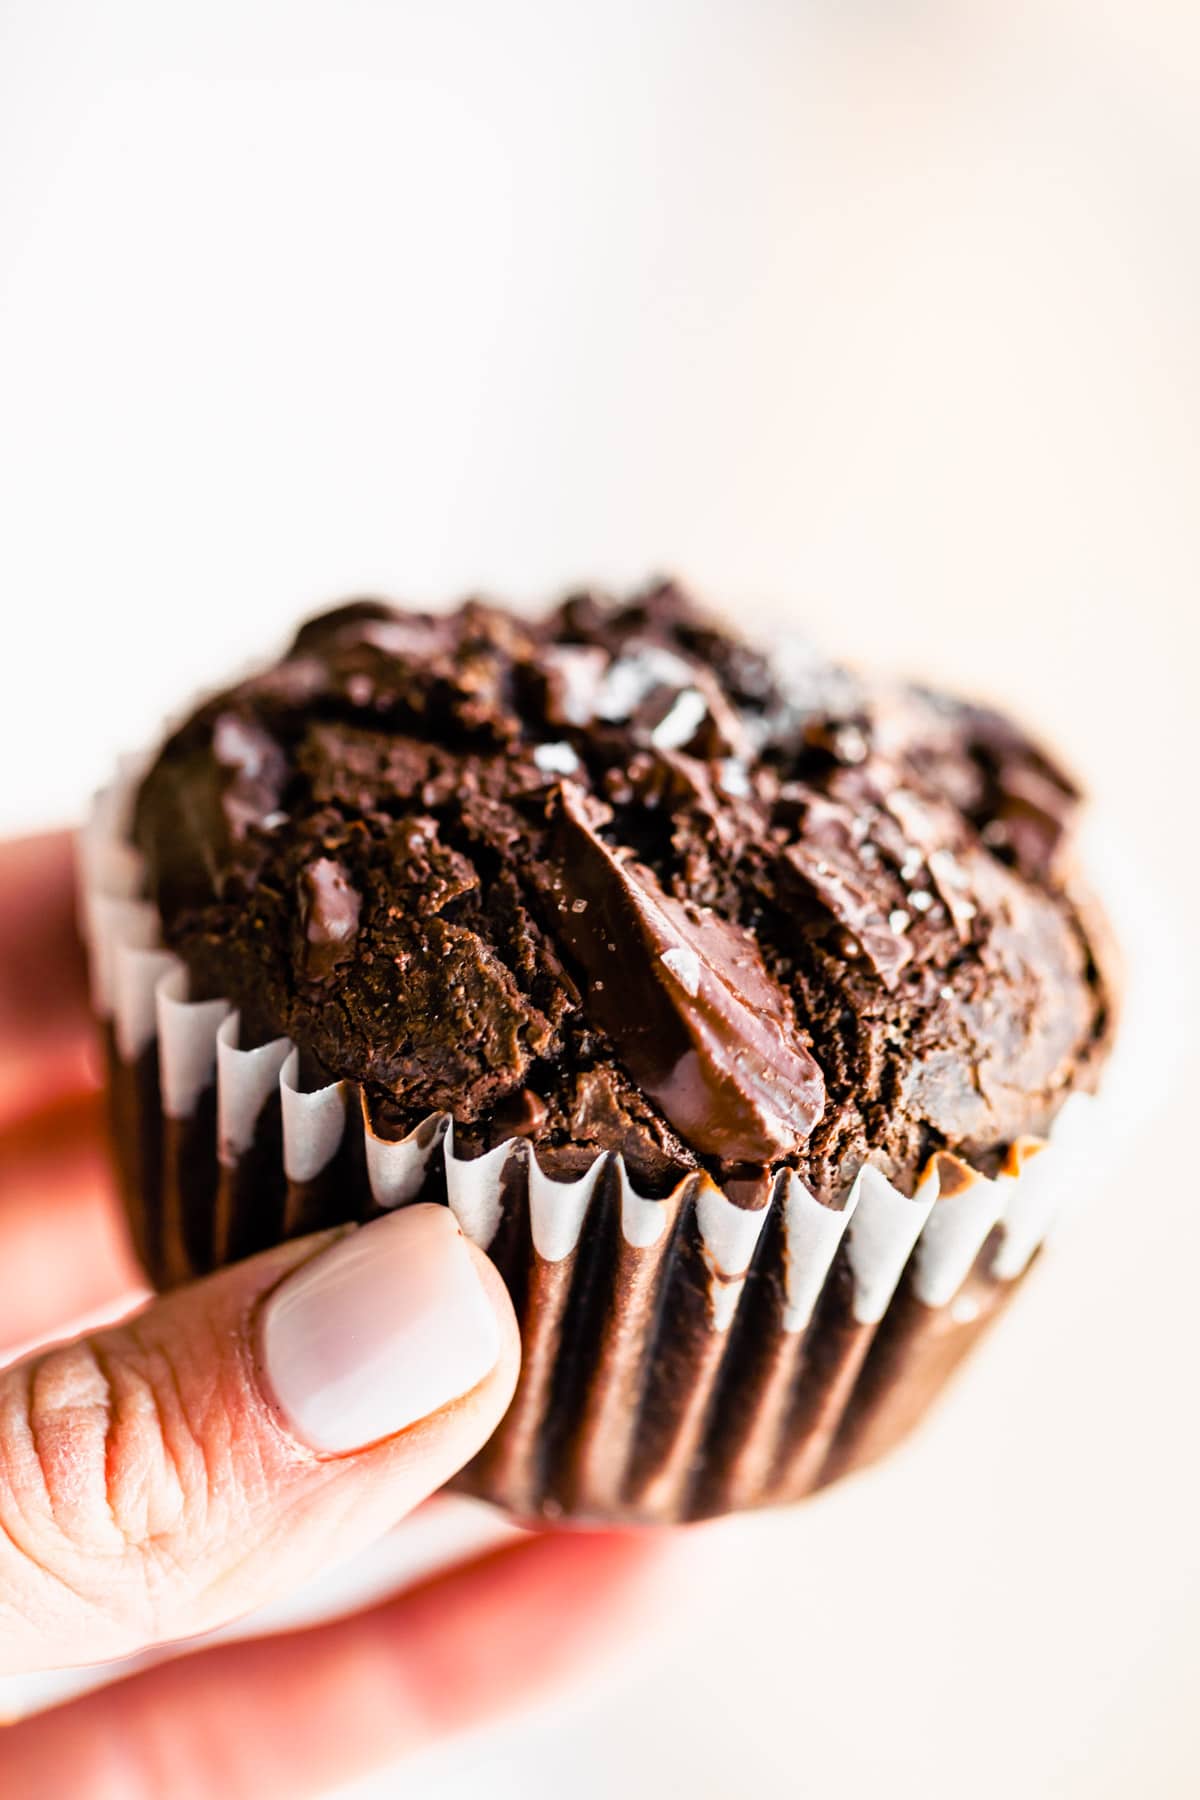 A hand holding a dark chocolate vegan muffin in white liner topped with dark chocolate chunks and sea salt flakes.